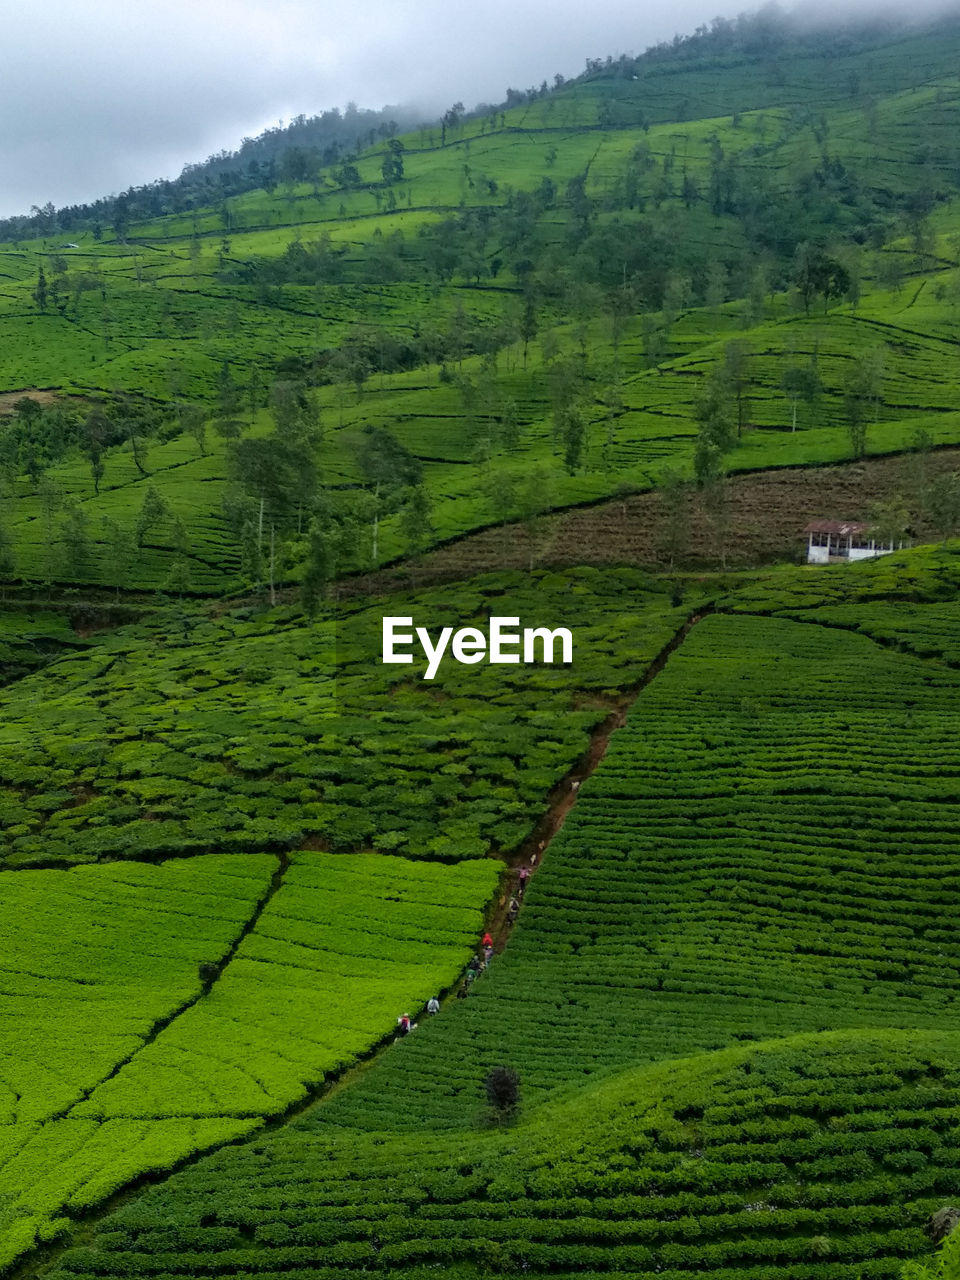 SCENIC VIEW OF AGRICULTURAL LANDSCAPE